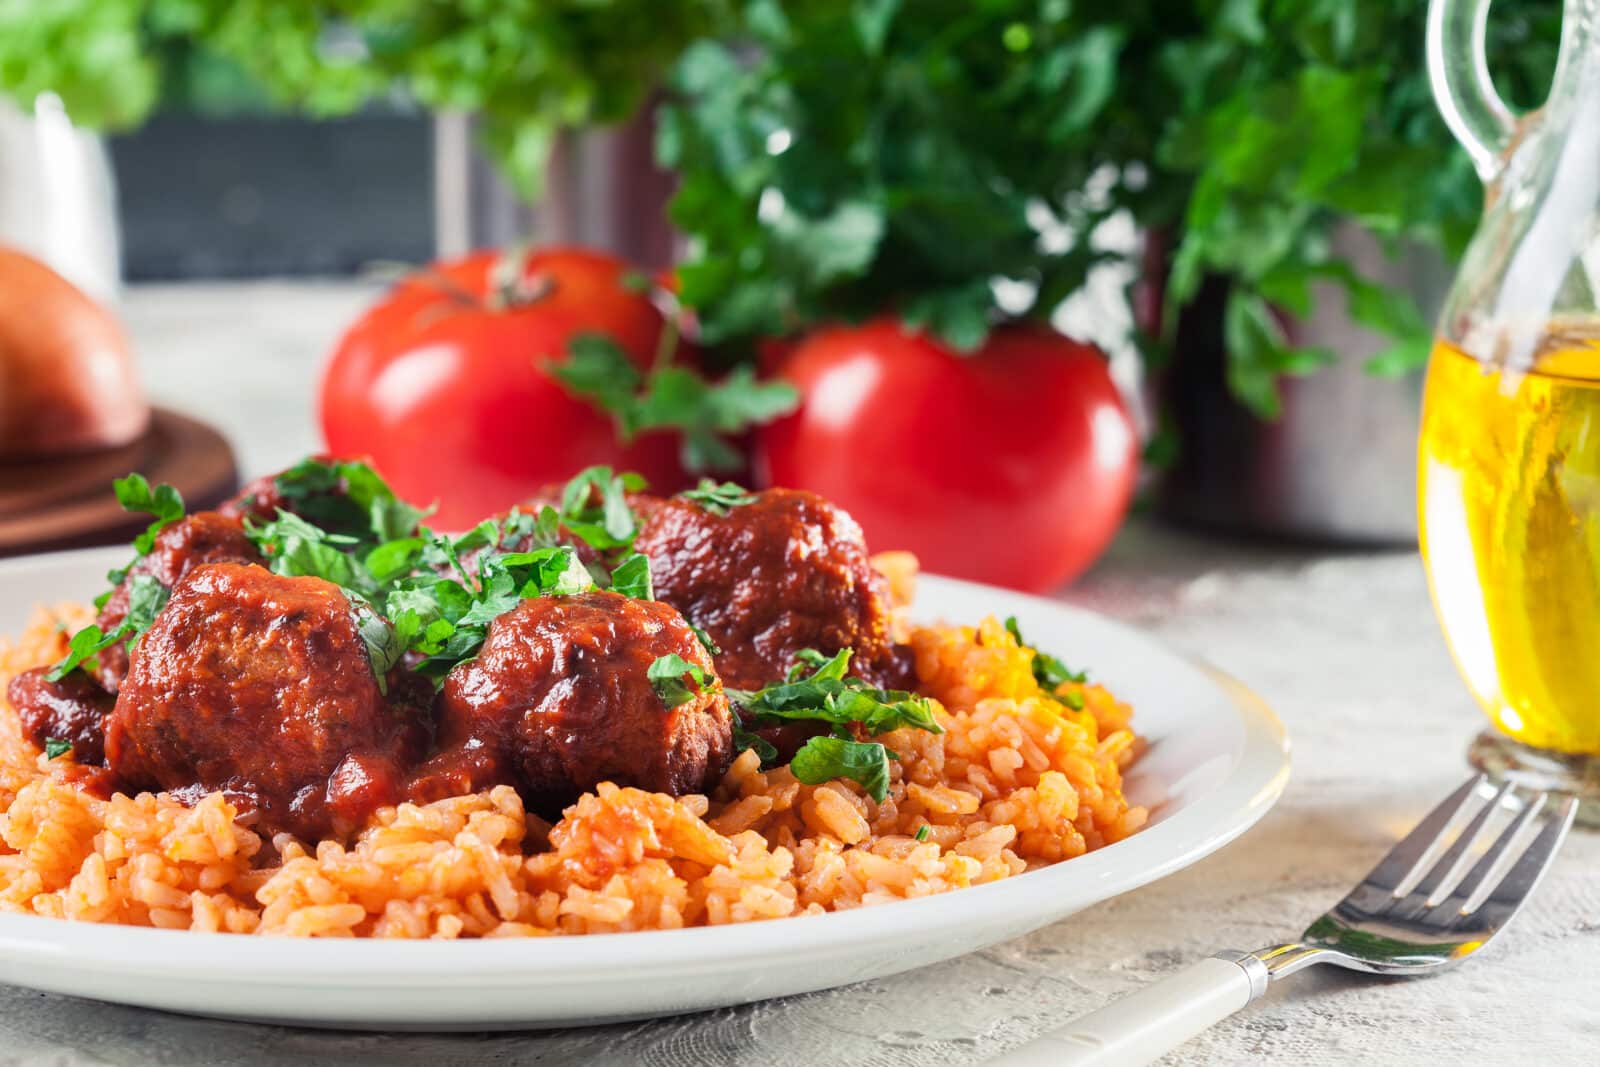 Meatballs with tomato sauce and red rice. Spanish and Mexican dish